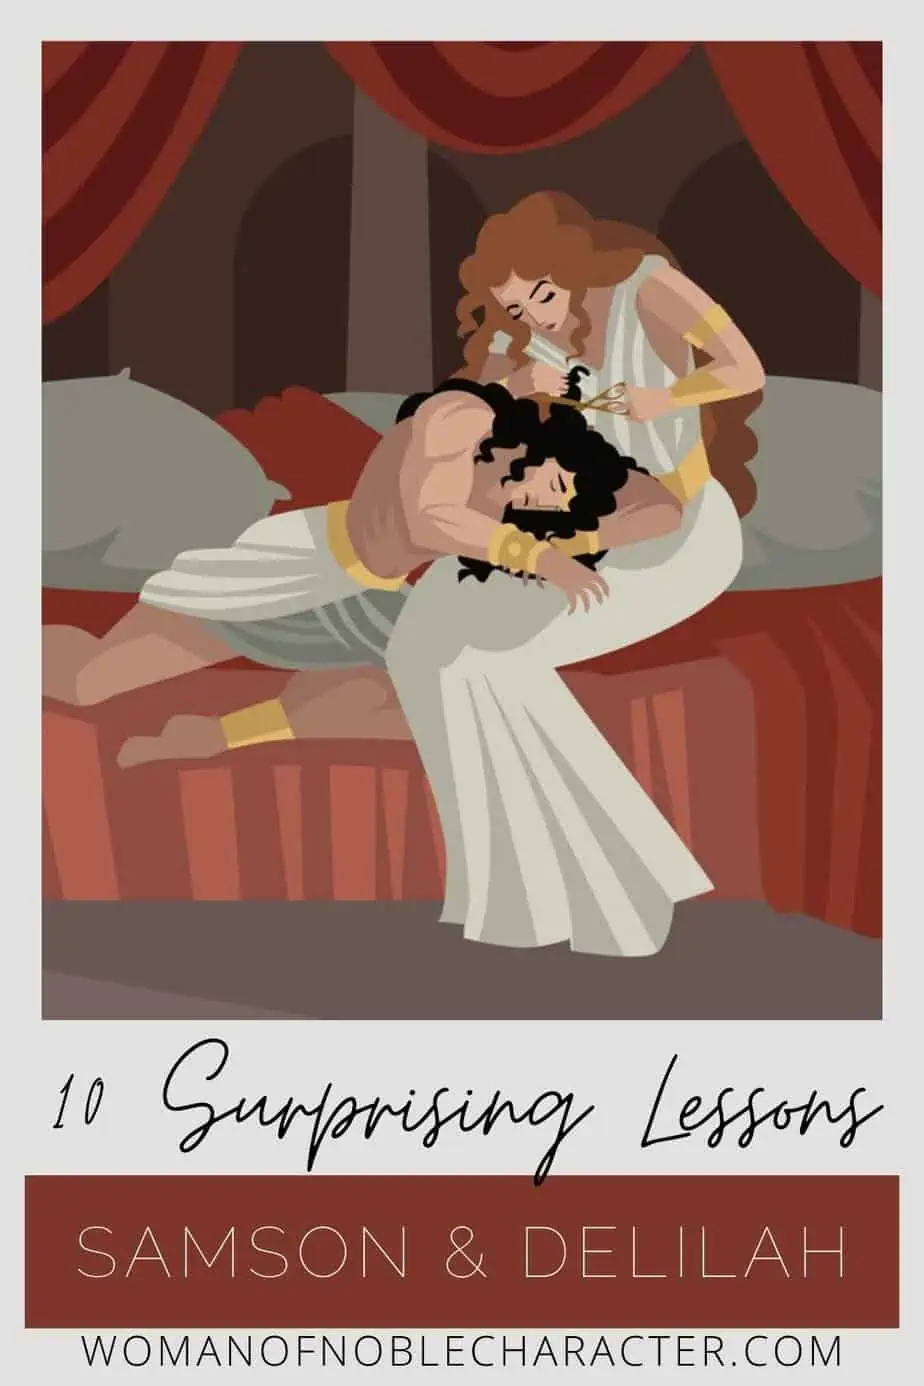 vector of Samson and Delilah in the Bible with the text 10 Surprising Lessons: Samson and Delilah